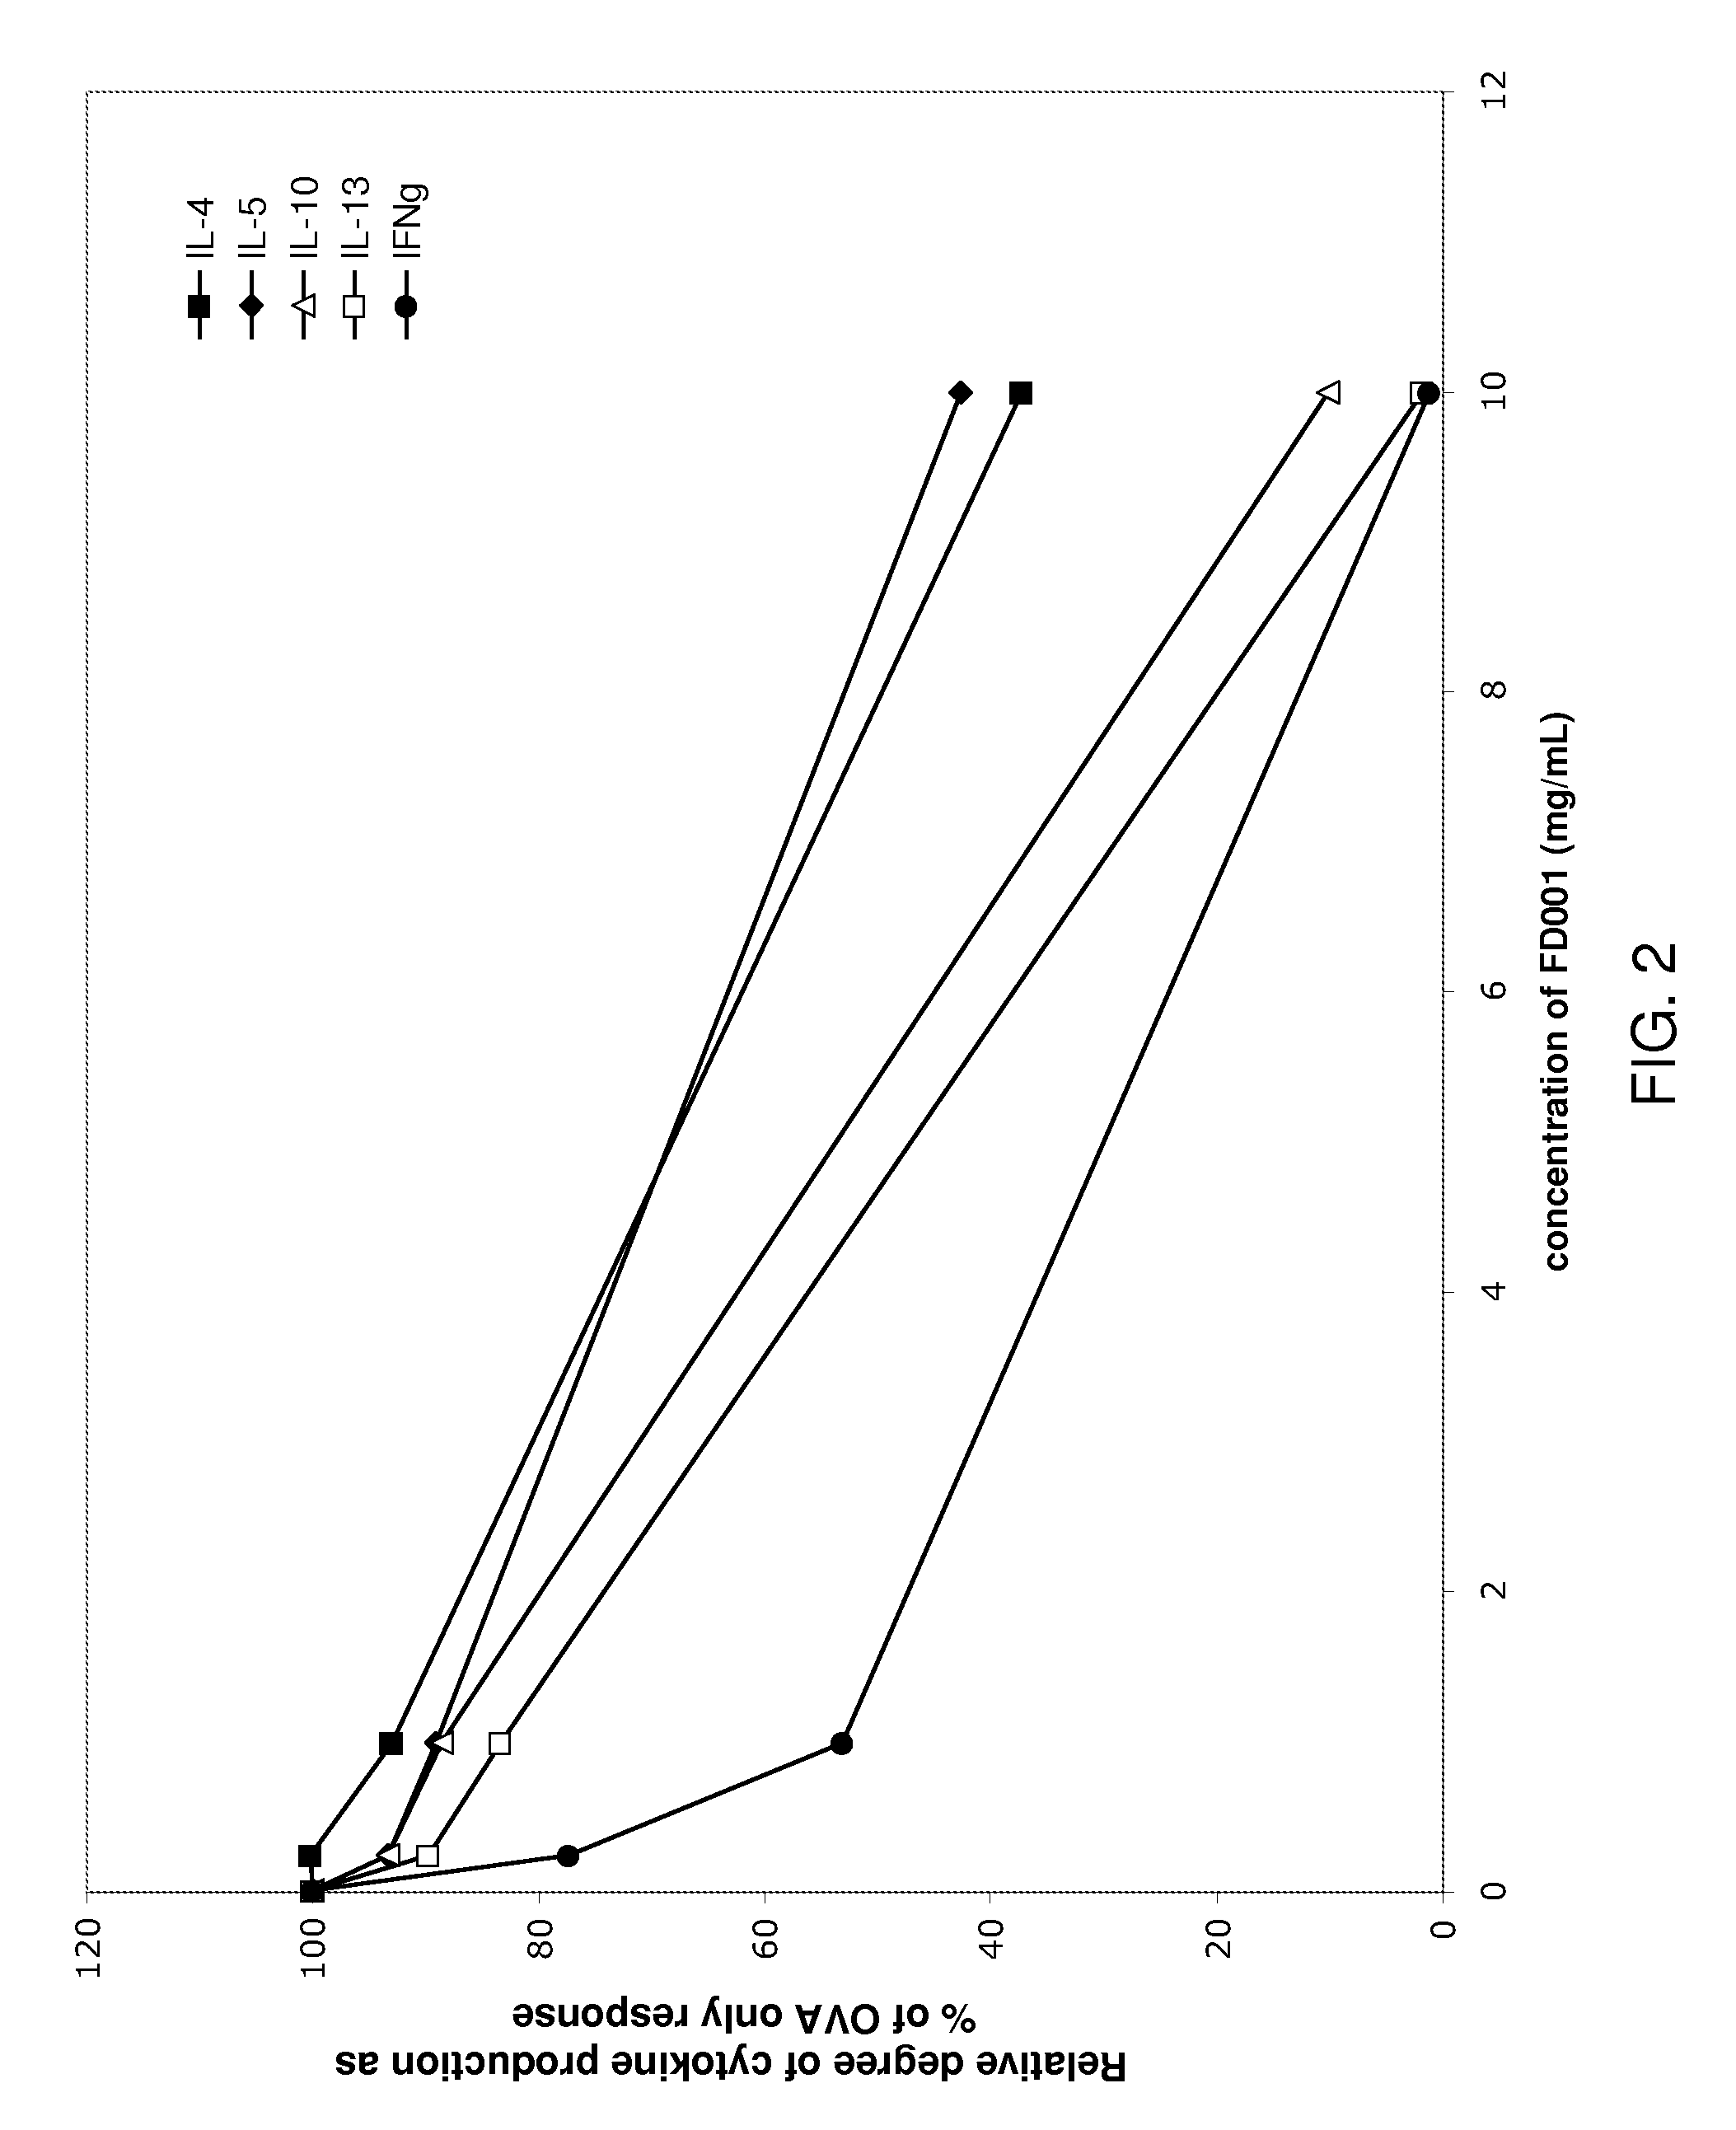 Combination Therapy Comprising Actinidia and Steroids and Uses Thereof